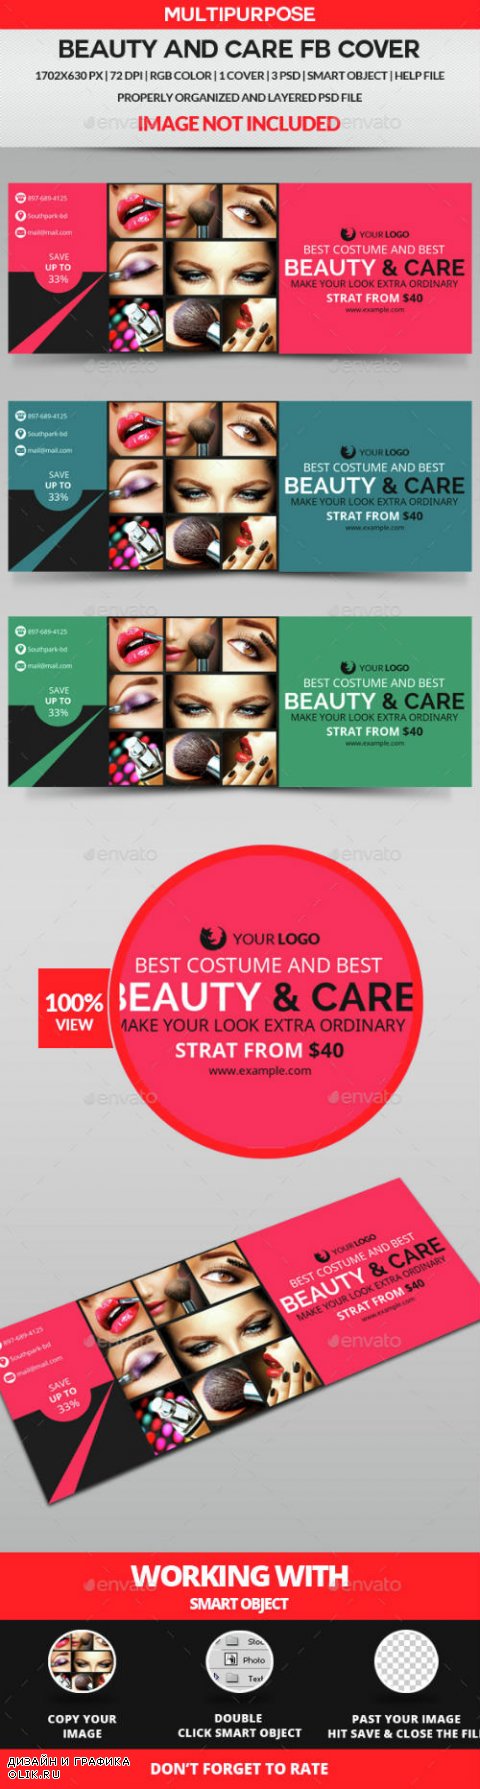 Beauty & Care Facebook Cover 14952279